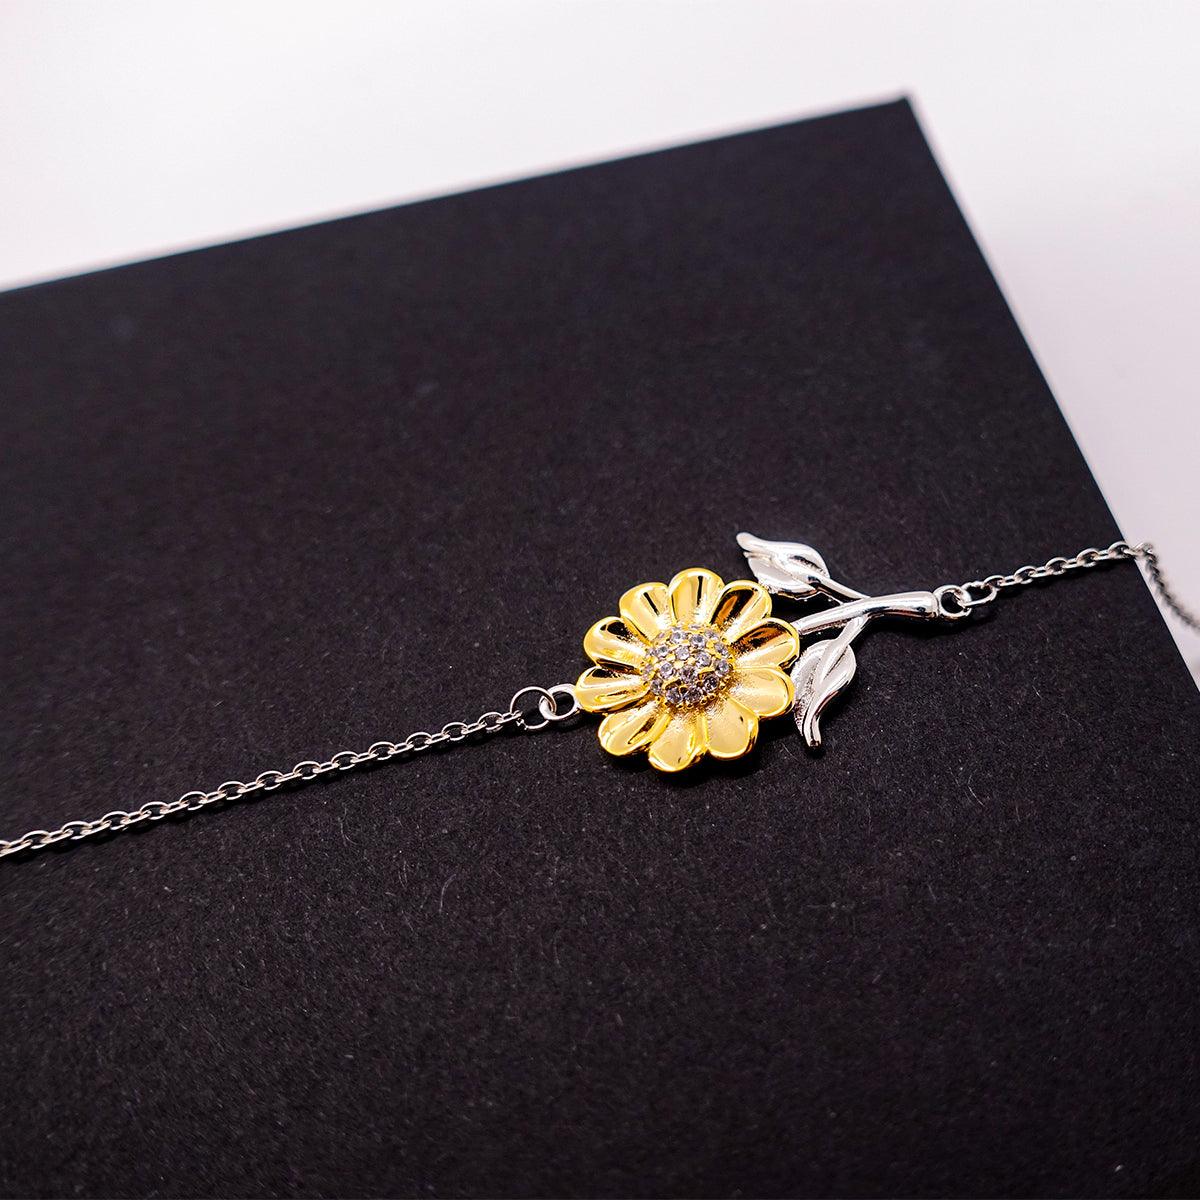 Remarkable Inspector Gifts, Your dedication and hard work, Inspirational Birthday Christmas Unique Sunflower Bracelet For Inspector, Coworkers, Men, Women, Friends - Mallard Moon Gift Shop